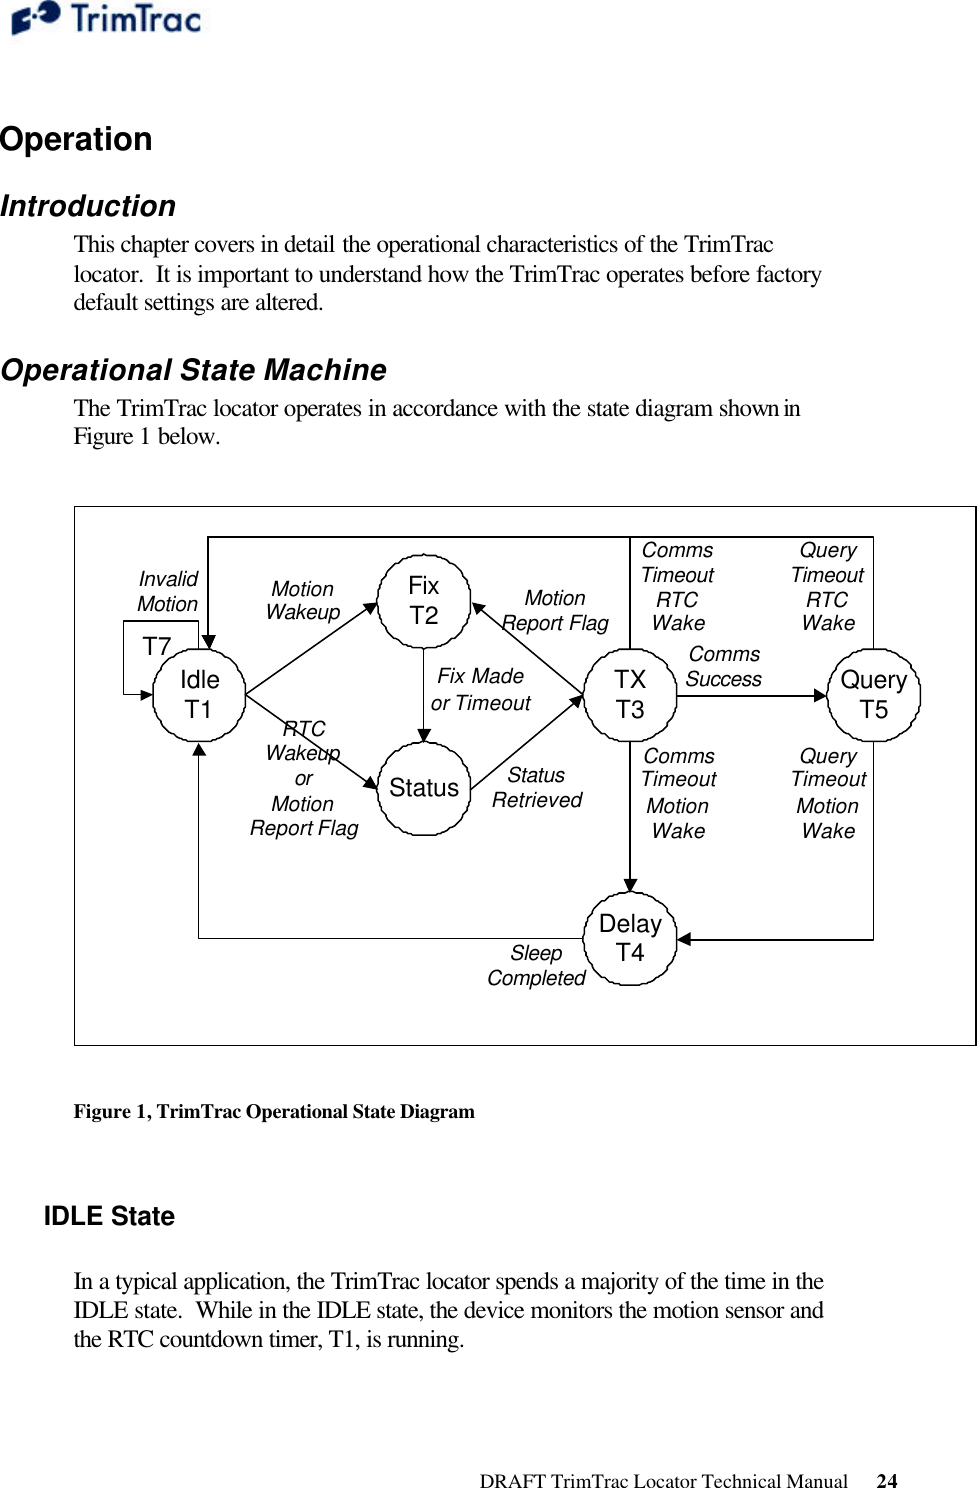  DRAFT TrimTrac Locator Technical Manual      24  Operation Introduction This chapter covers in detail the operational characteristics of the TrimTrac locator.  It is important to understand how the TrimTrac operates before factory default settings are altered. Operational State Machine The TrimTrac locator operates in accordance with the state diagram shown in Figure 1 below.  IdleT1FixT2StatusTXT3 QueryT5DelayT4SleepCompletedCommsTimeoutMotionWakeQueryTimeoutMotionWakeCommsSuccessRTCWakeuporMotionReport FlagMotionWakeupFix Madeor TimeoutStatusRetrievedInvalidMotionT7MotionReport FlagCommsTimeoutRTCWakeQueryTimeoutRTCWake Figure 1, TrimTrac Operational State Diagram  IDLE State  In a typical application, the TrimTrac locator spends a majority of the time in the IDLE state.  While in the IDLE state, the device monitors the motion sensor and the RTC countdown timer, T1, is running.   